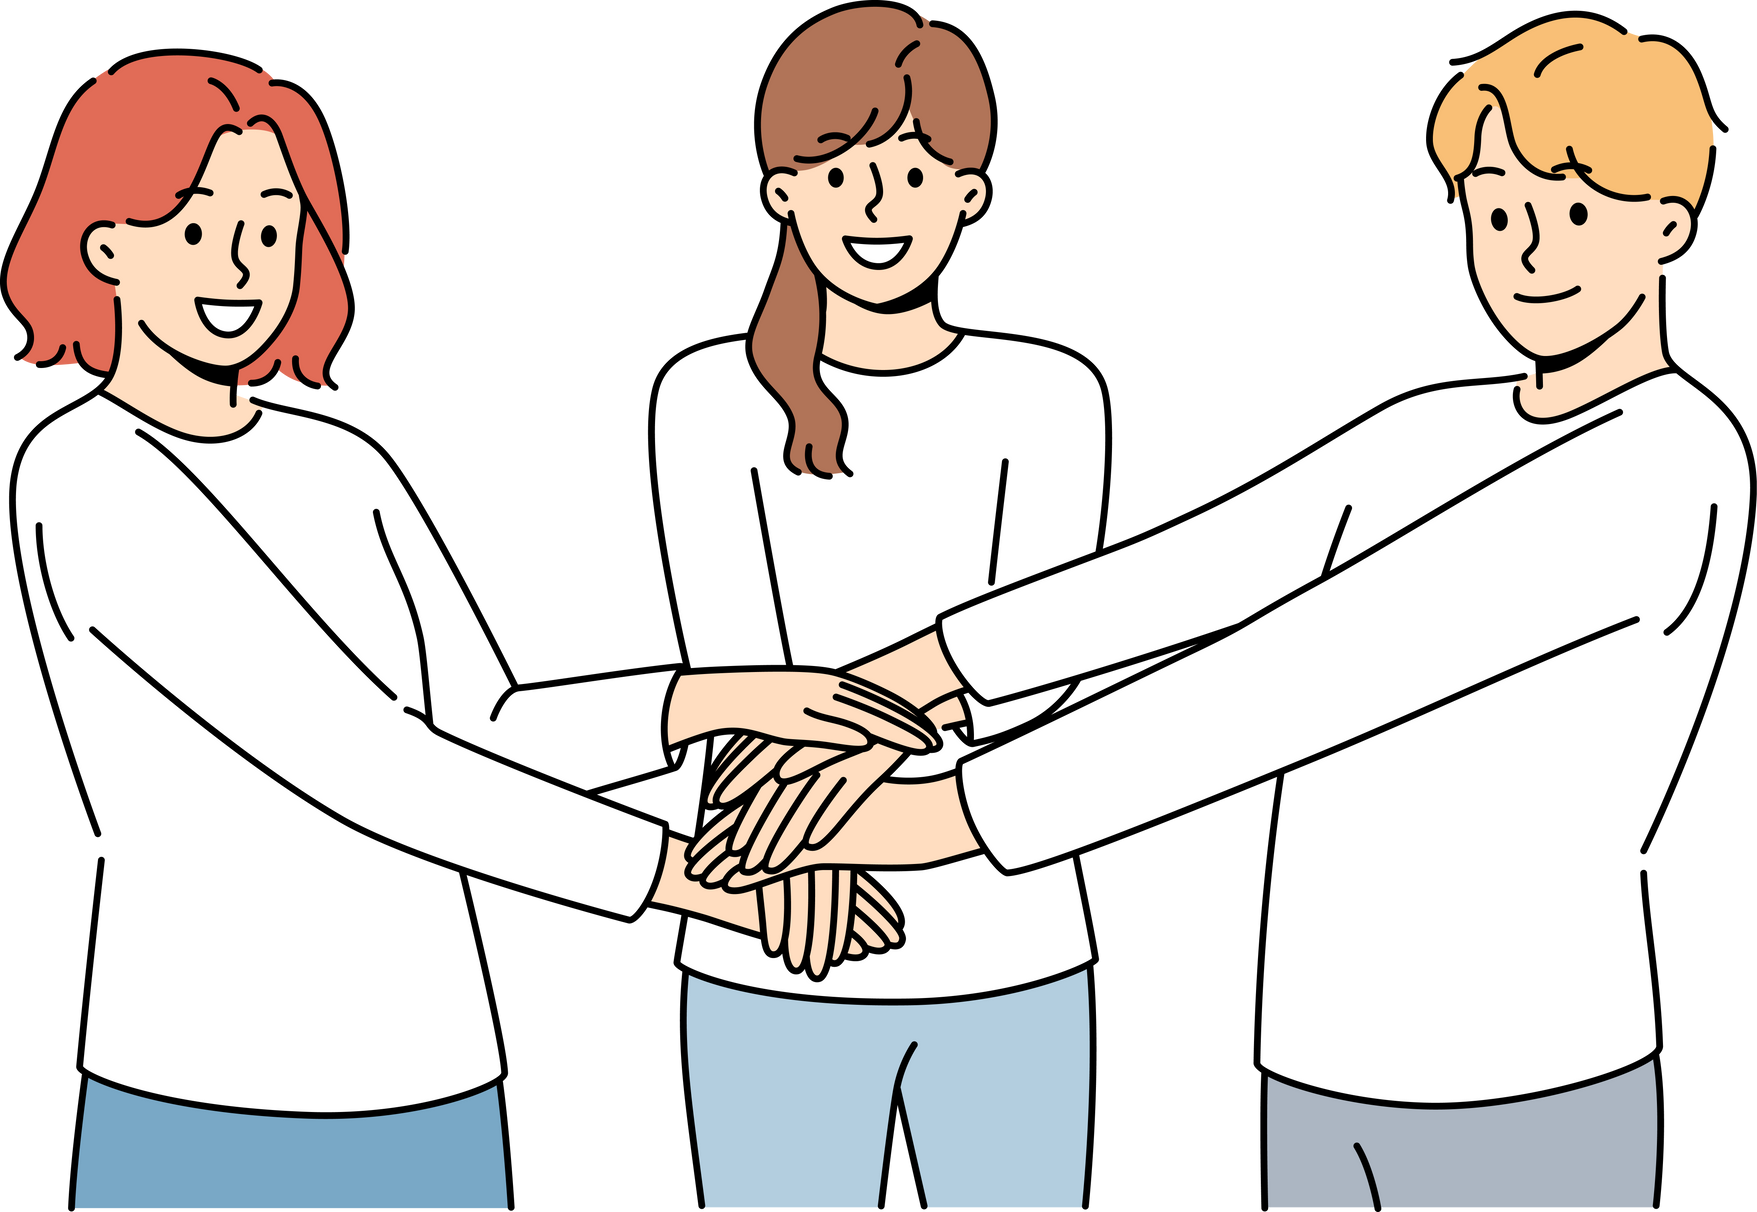 Friendly team people holding hands demonstrate cohesion and unity, wanting to achieve goals together